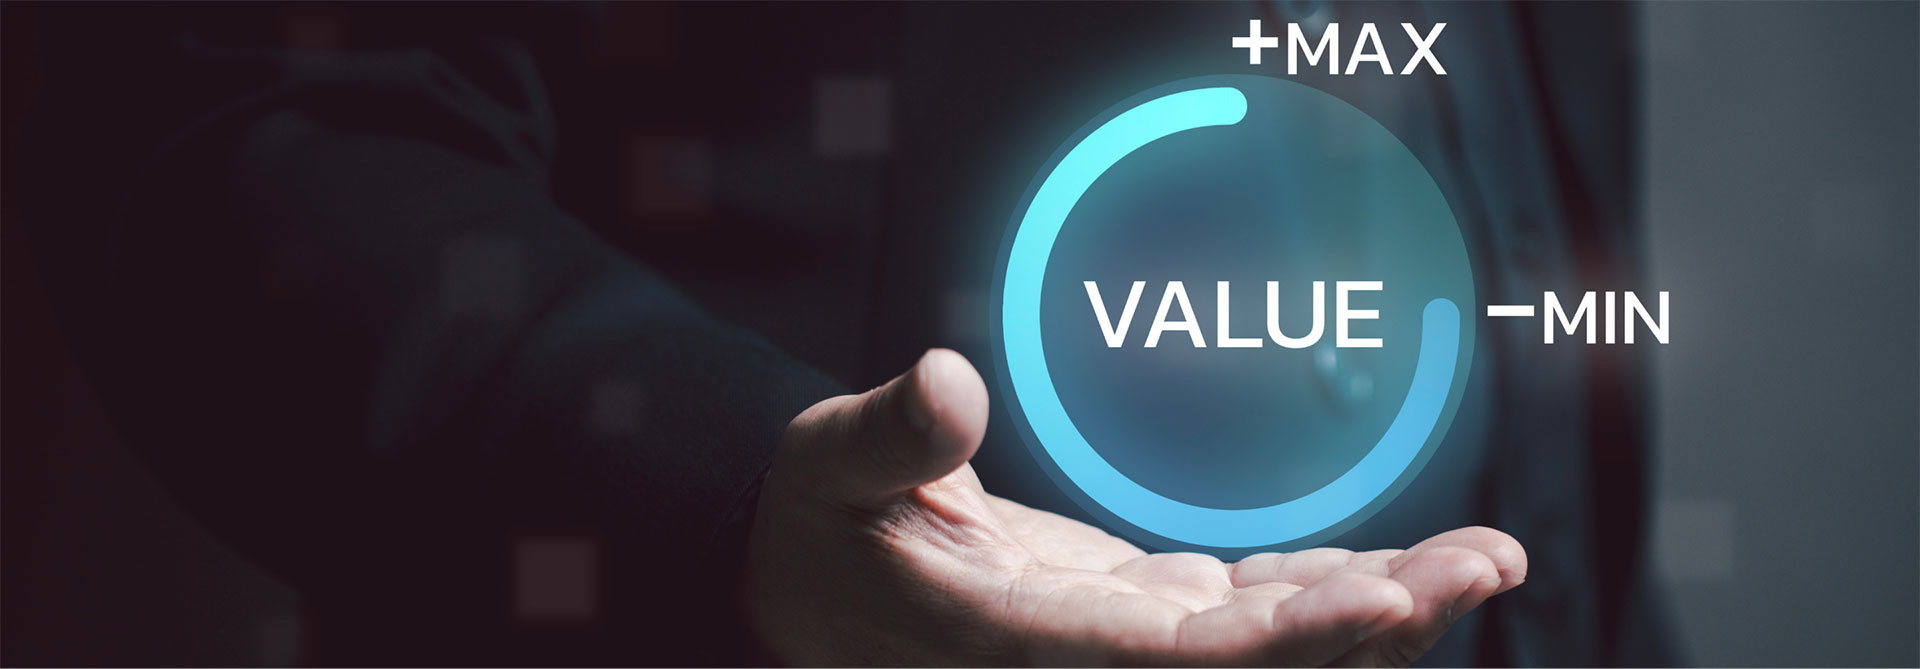 ValueAdd - Your trusted analytics partner!     ValueAdd is your trusted partner for Data, Analytics, and Execution. We help accelerate revenue, increase alpha, execute deals, boost efficiency, provide insights, bring value-addition and cost savings!     Know More